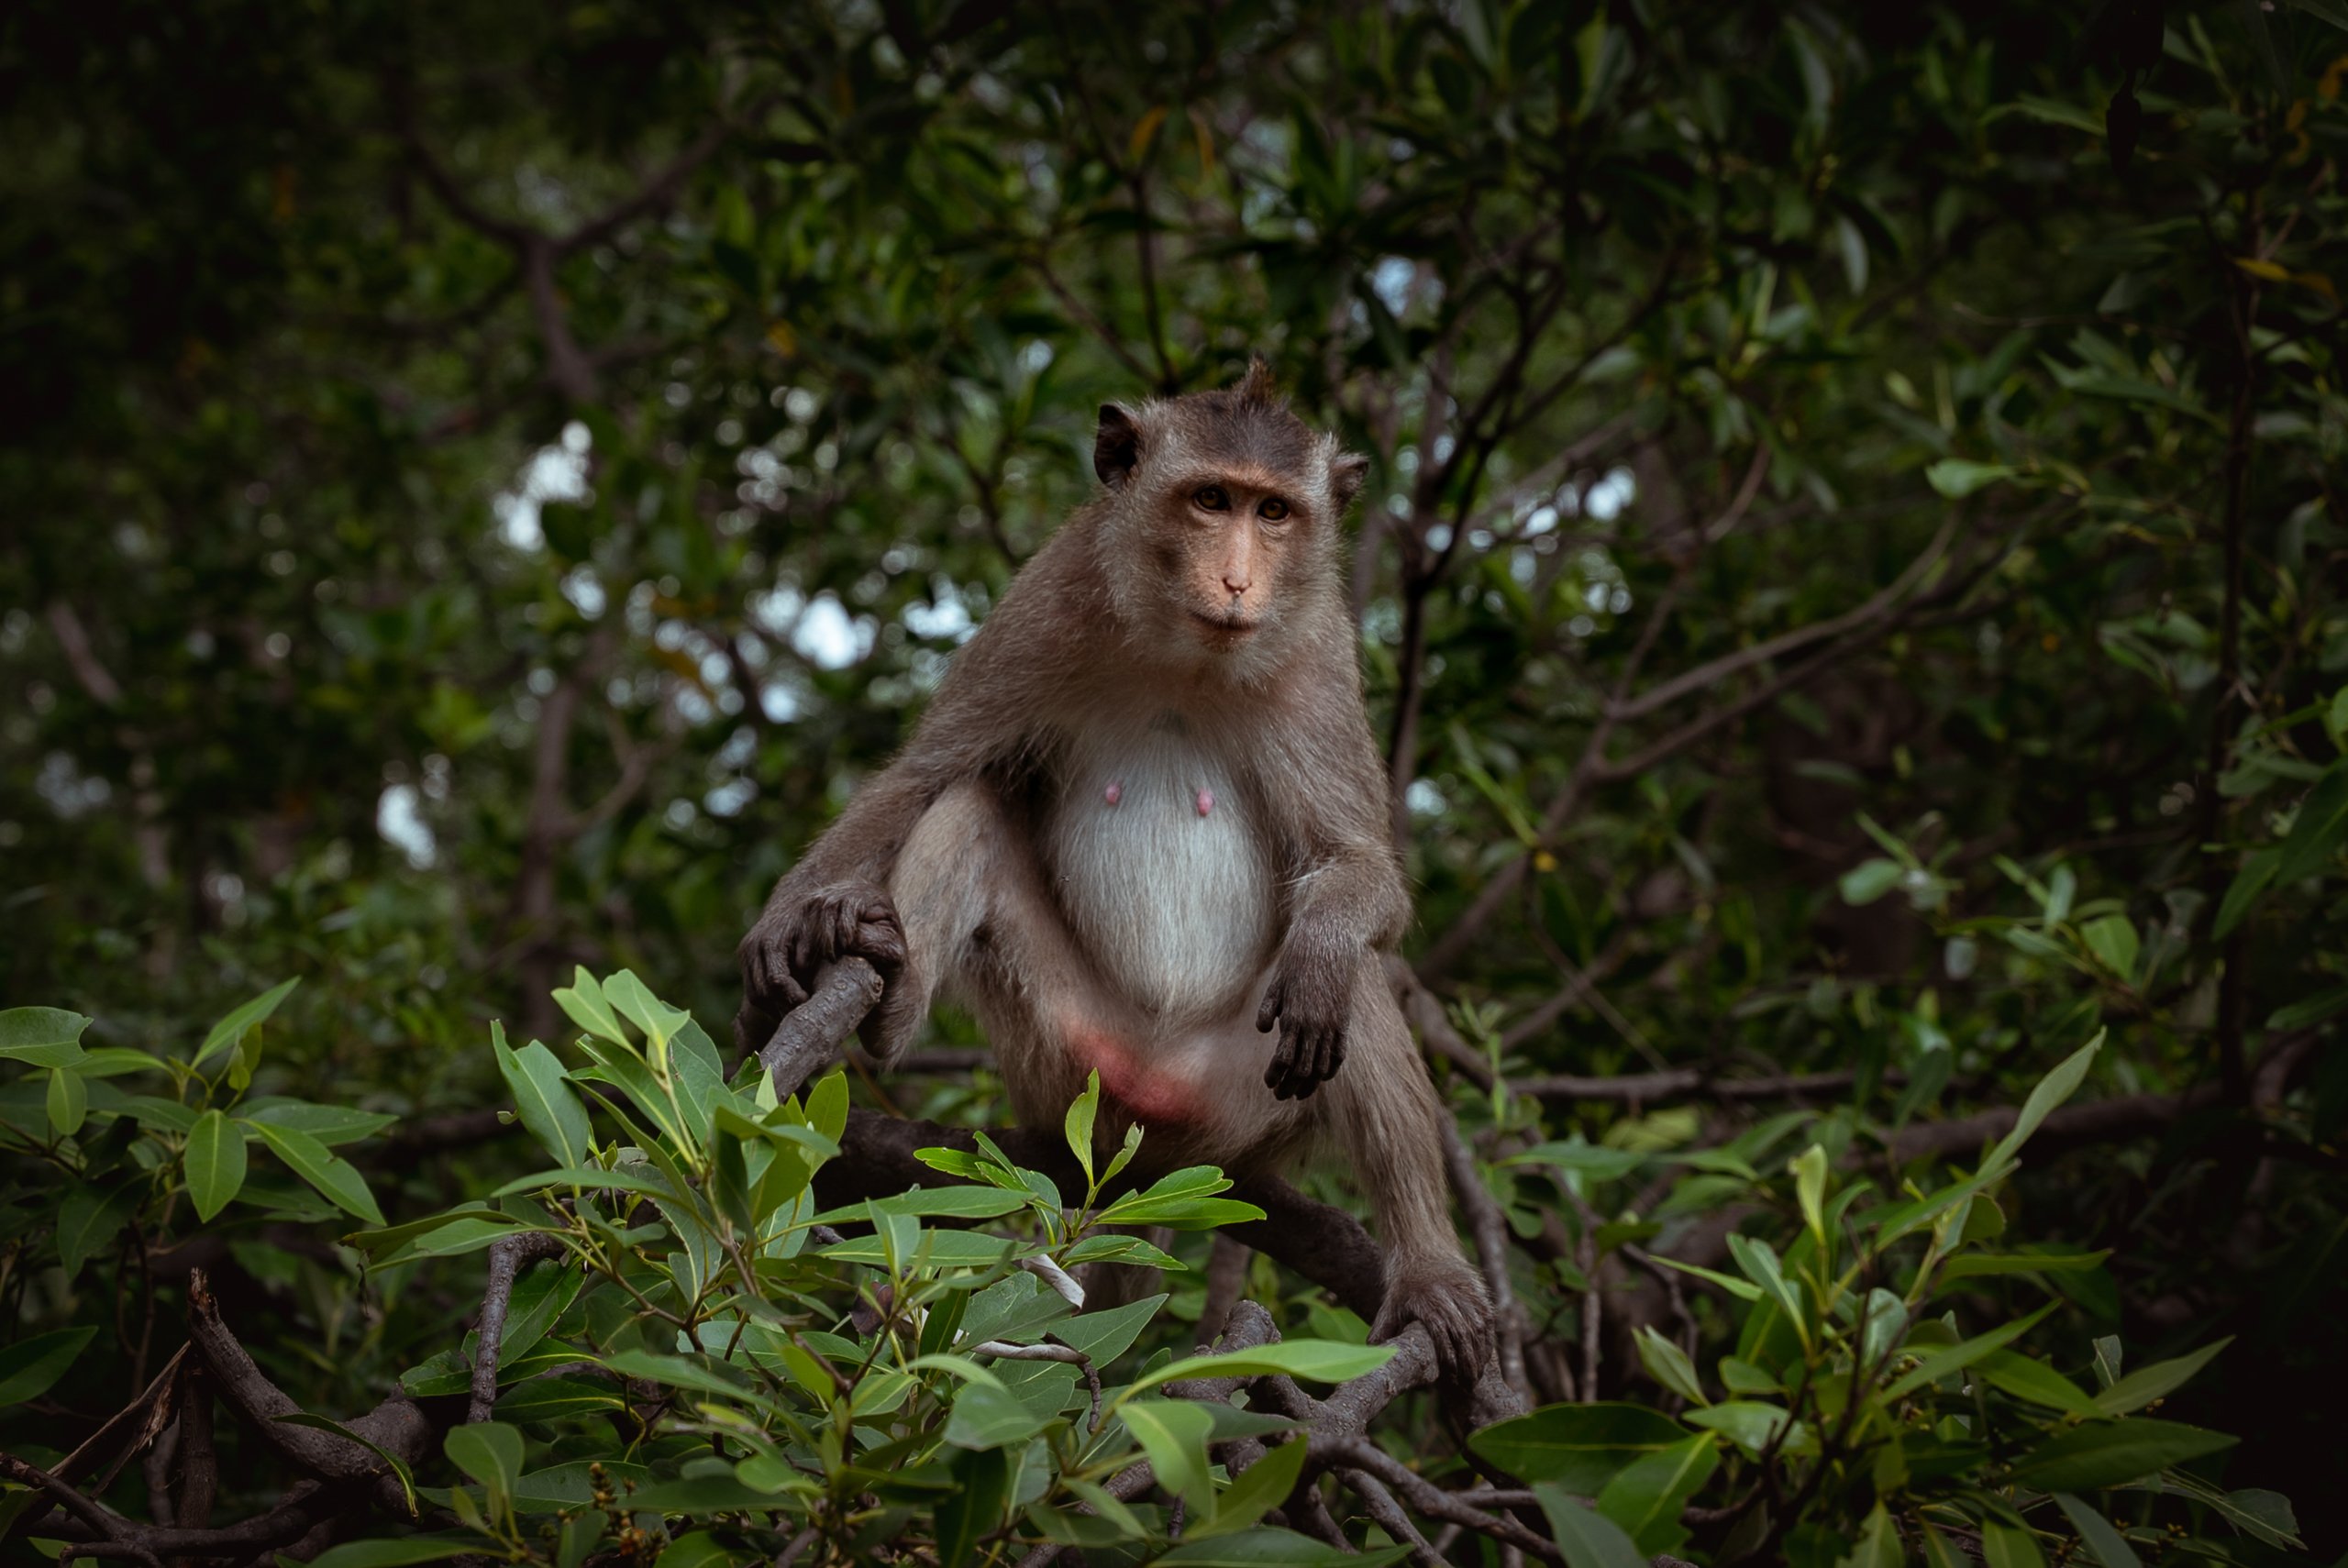 A monkey watches the humans invading its forest